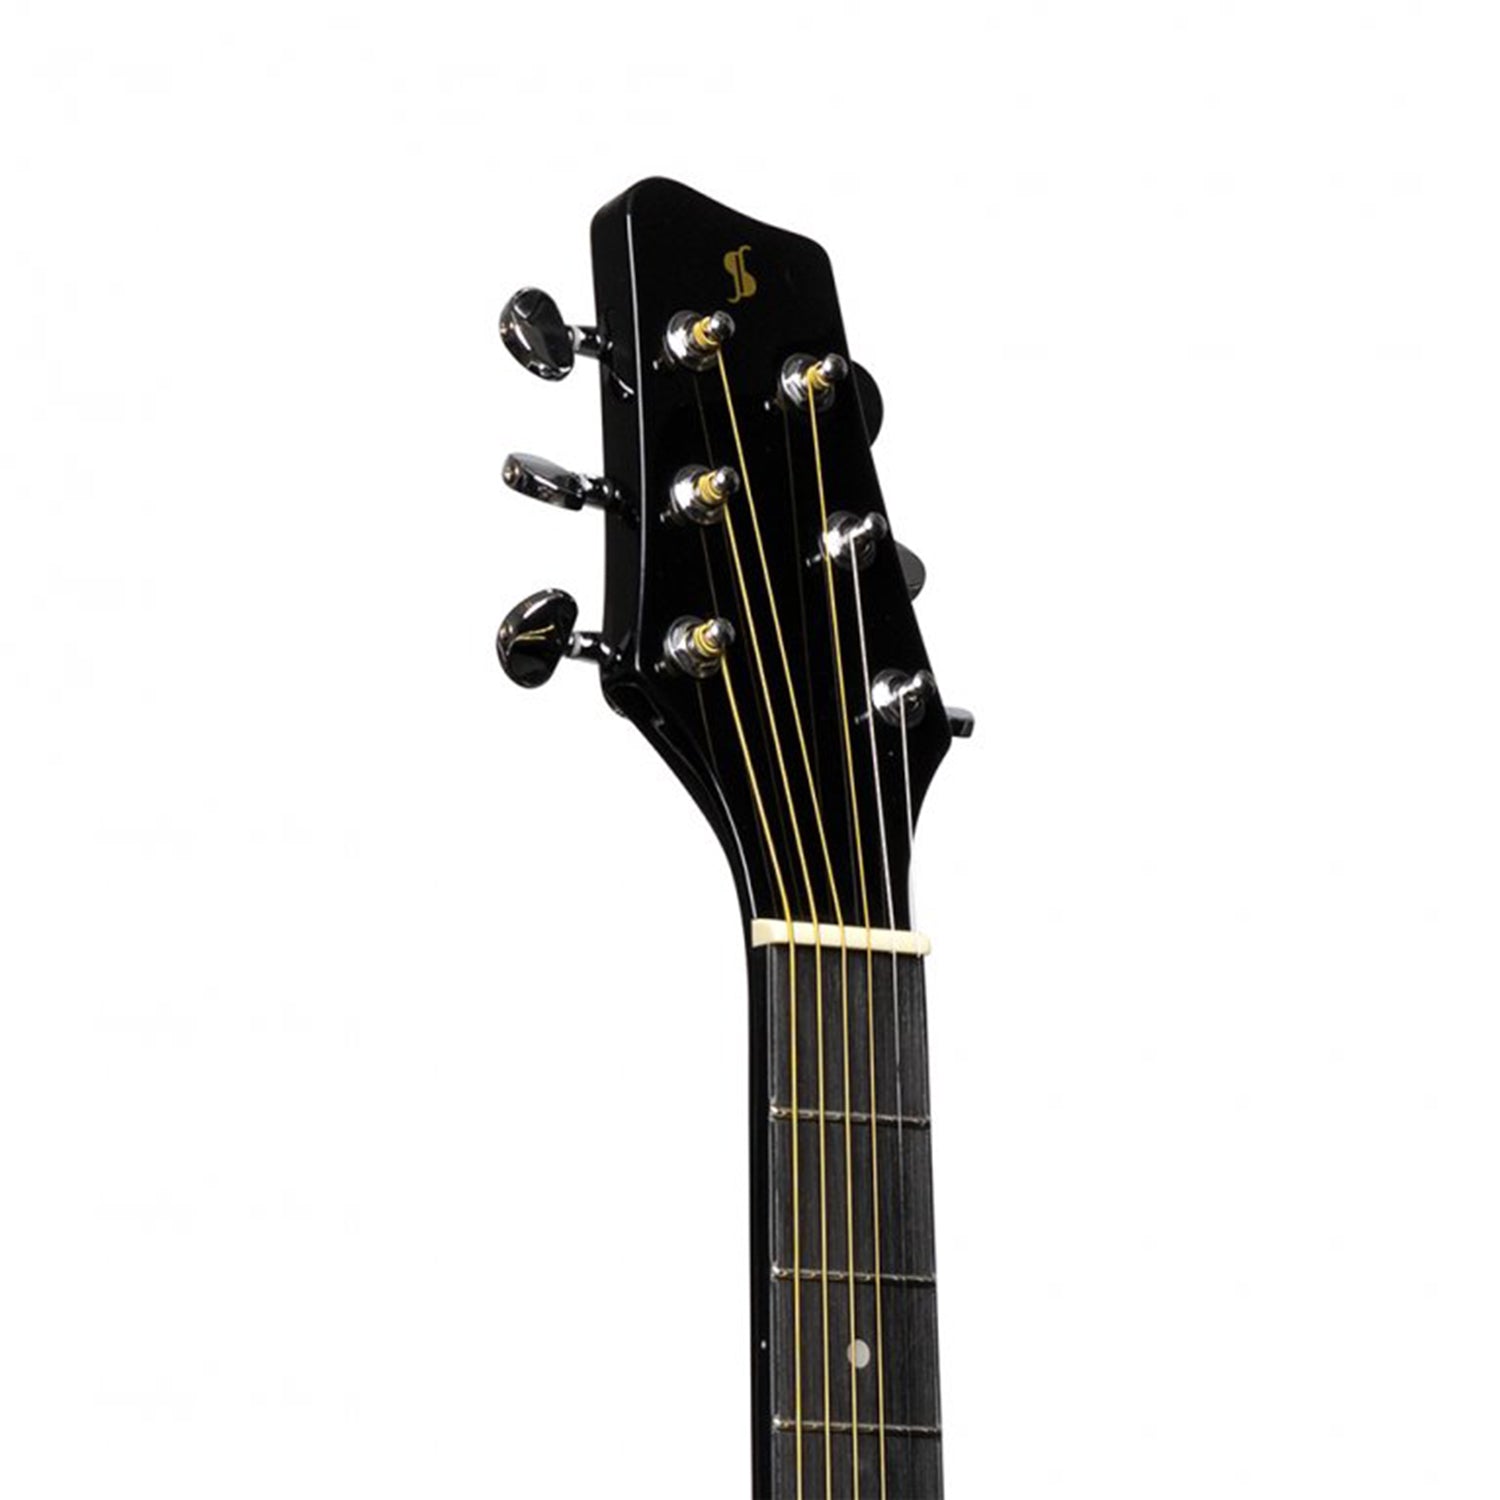 Stagg SA35 A-BK Black Auditorium Guitar with Basswood Top